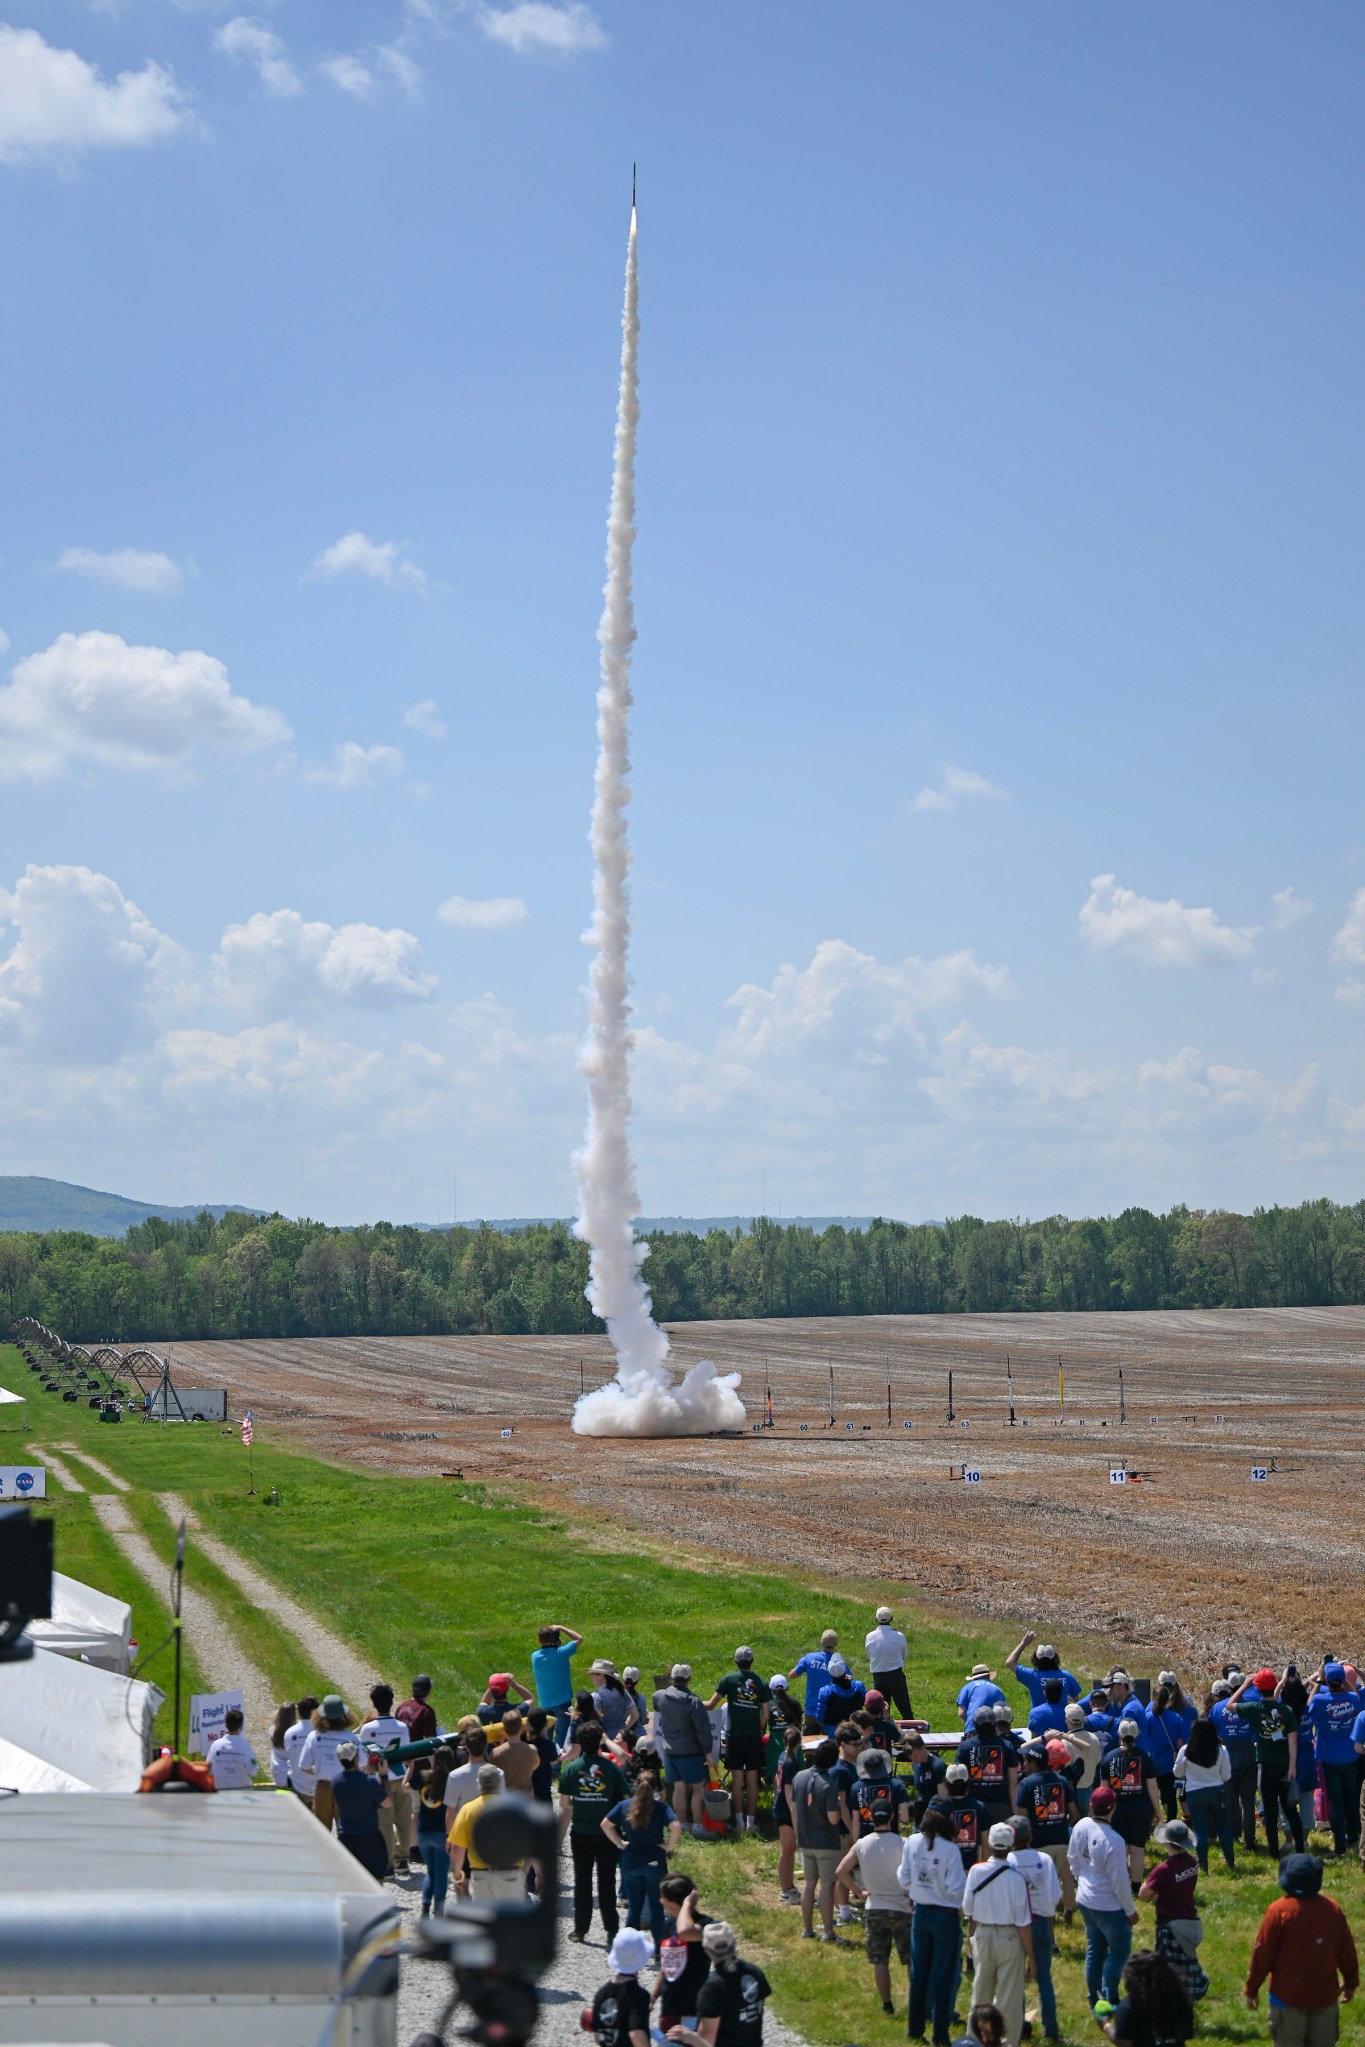 Student teams and attendees of NASA’s 2023 Student Launch competition observe a rocket take flight near NASA’s Marshall Space Flight Center in Huntsville, Alabama, April 2023.